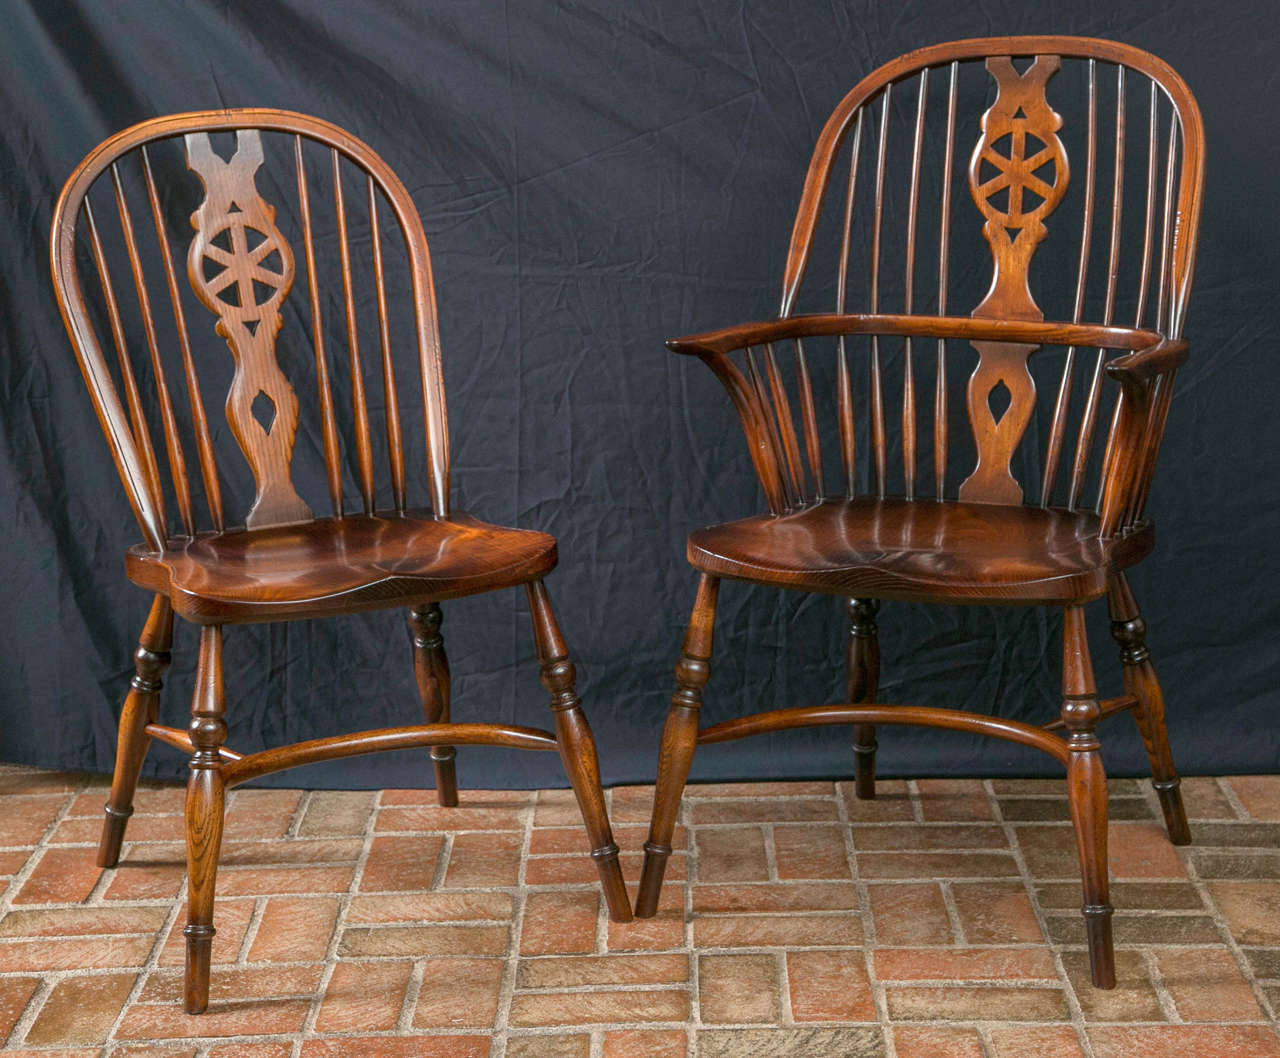 Created using the trusted techniques passed down through the centuries, these wheel back Windsor chairs in oak and ashwood are surprisingly comfortable for chairs constructed of so many parts. The side chair has 16 individual pieces and the armchair